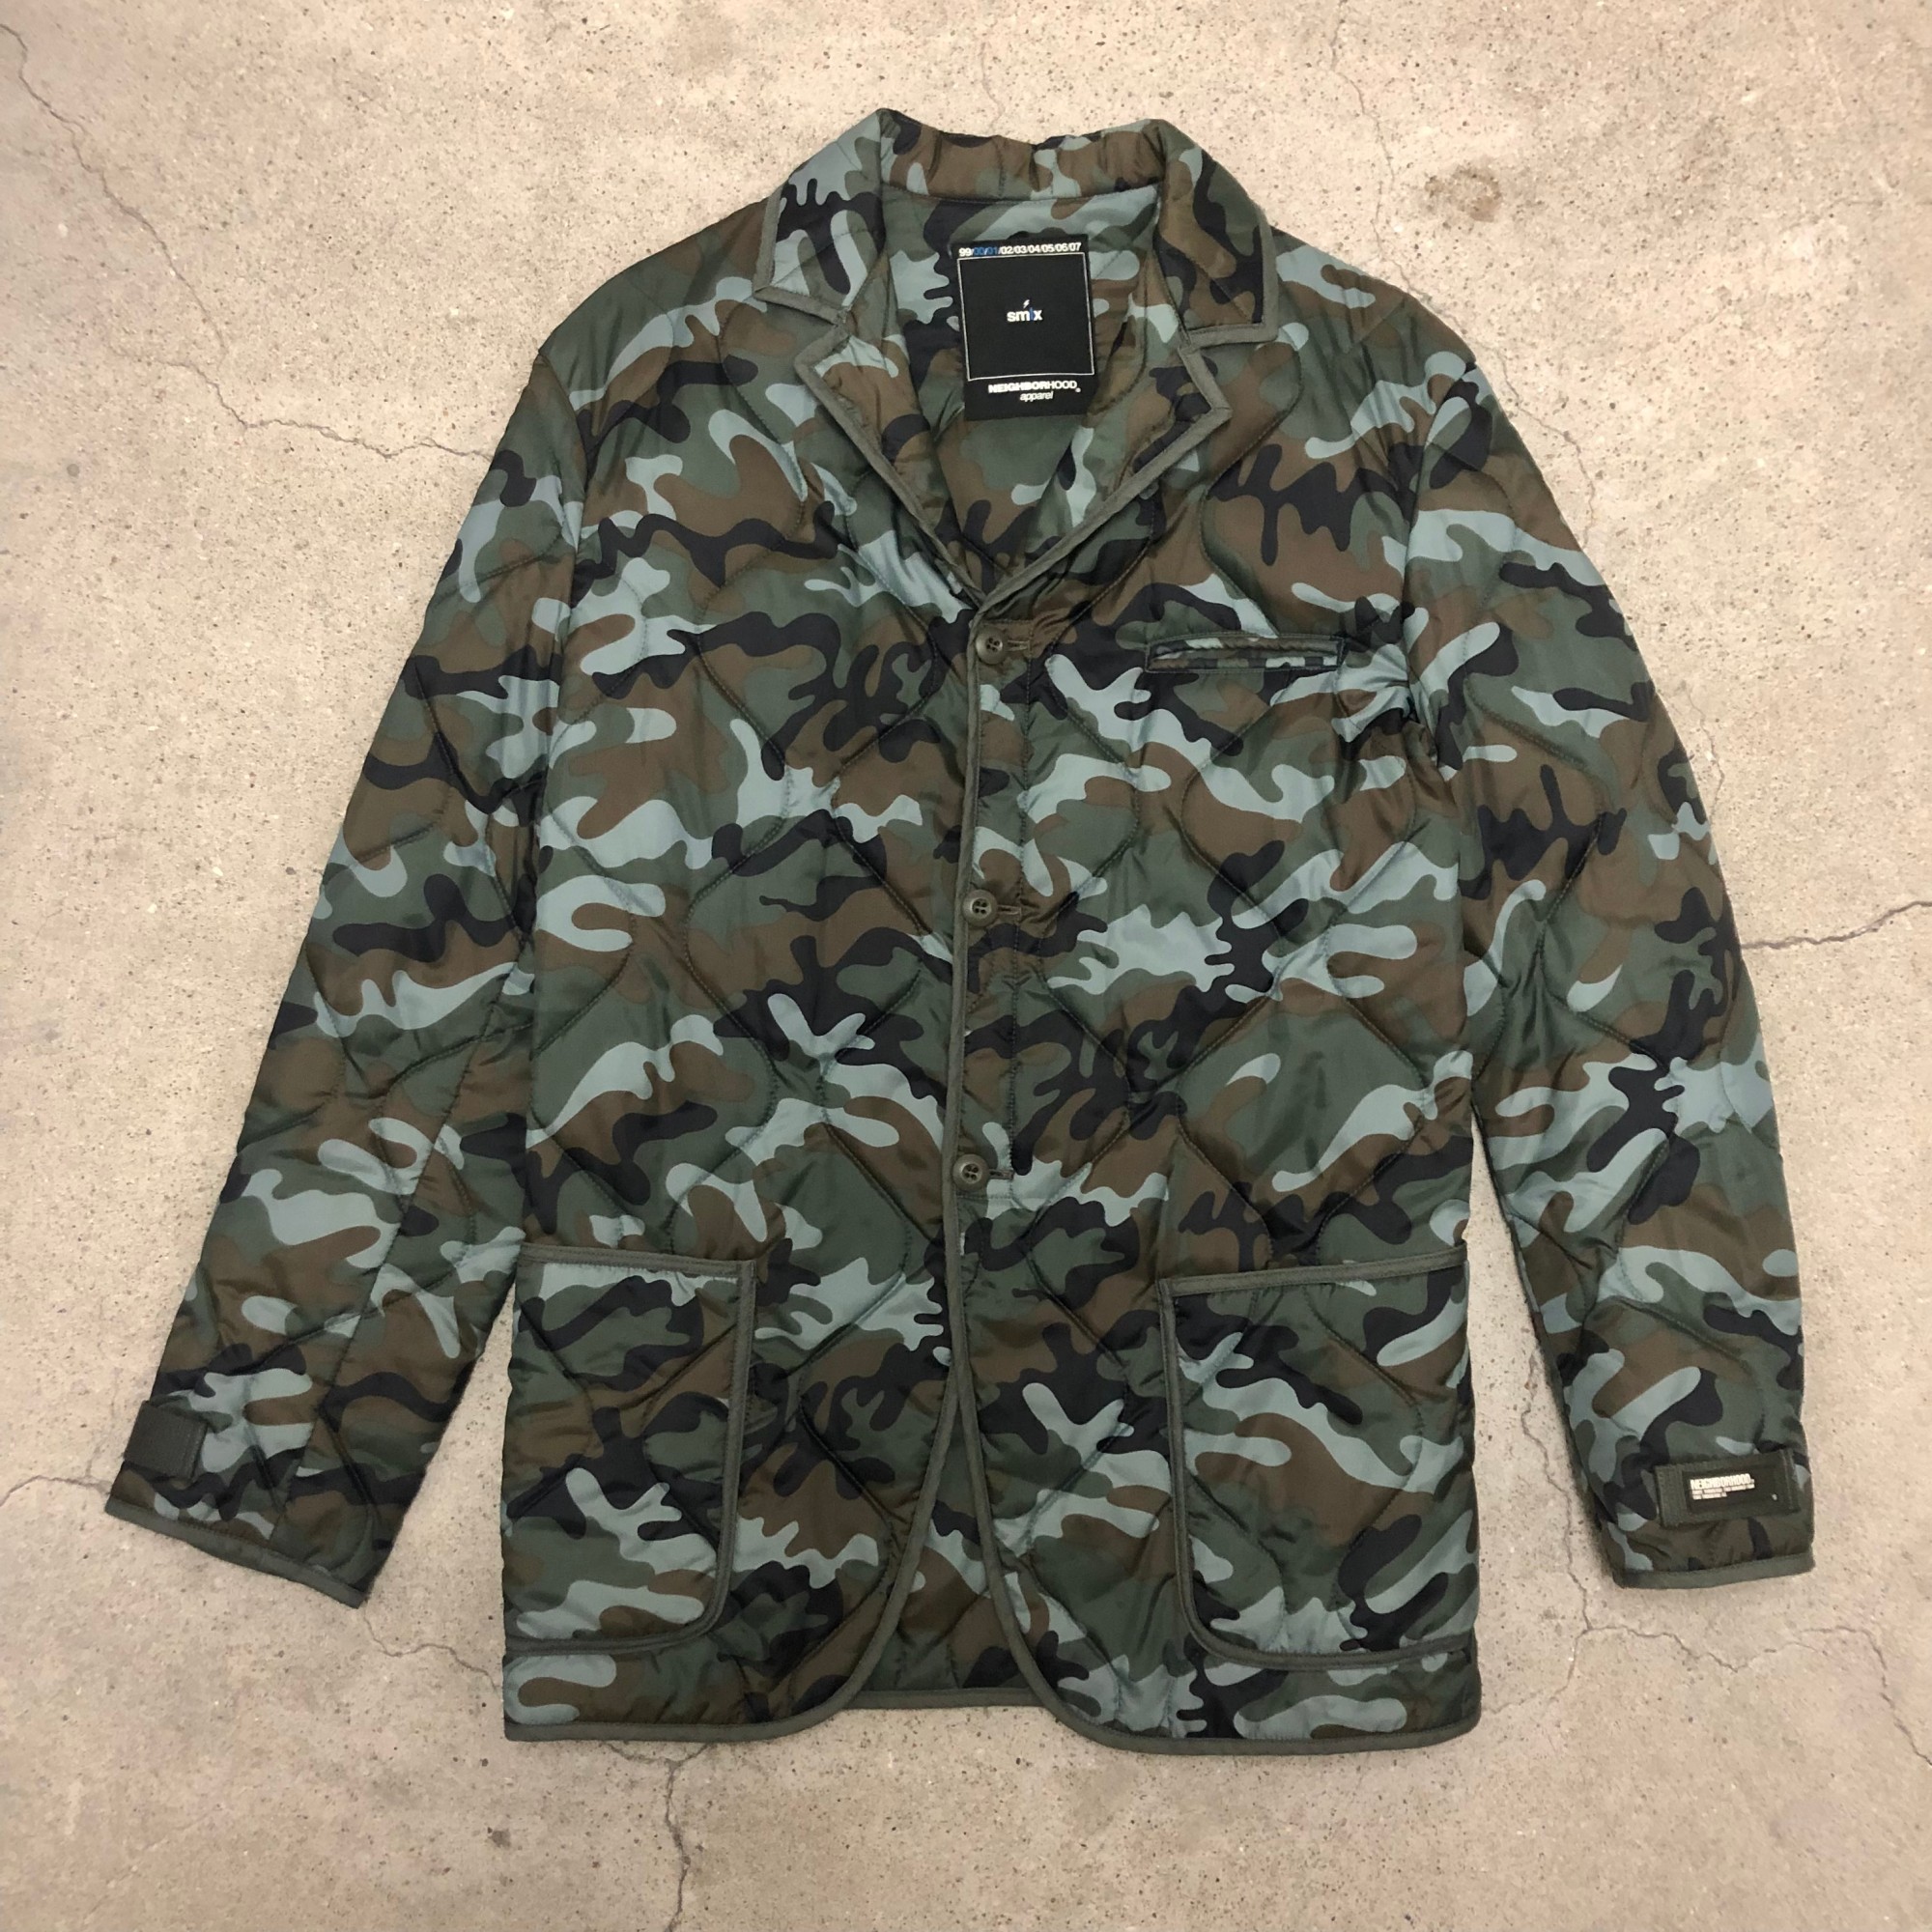 00s NEIGHBORHOOD/Camouflage quilted